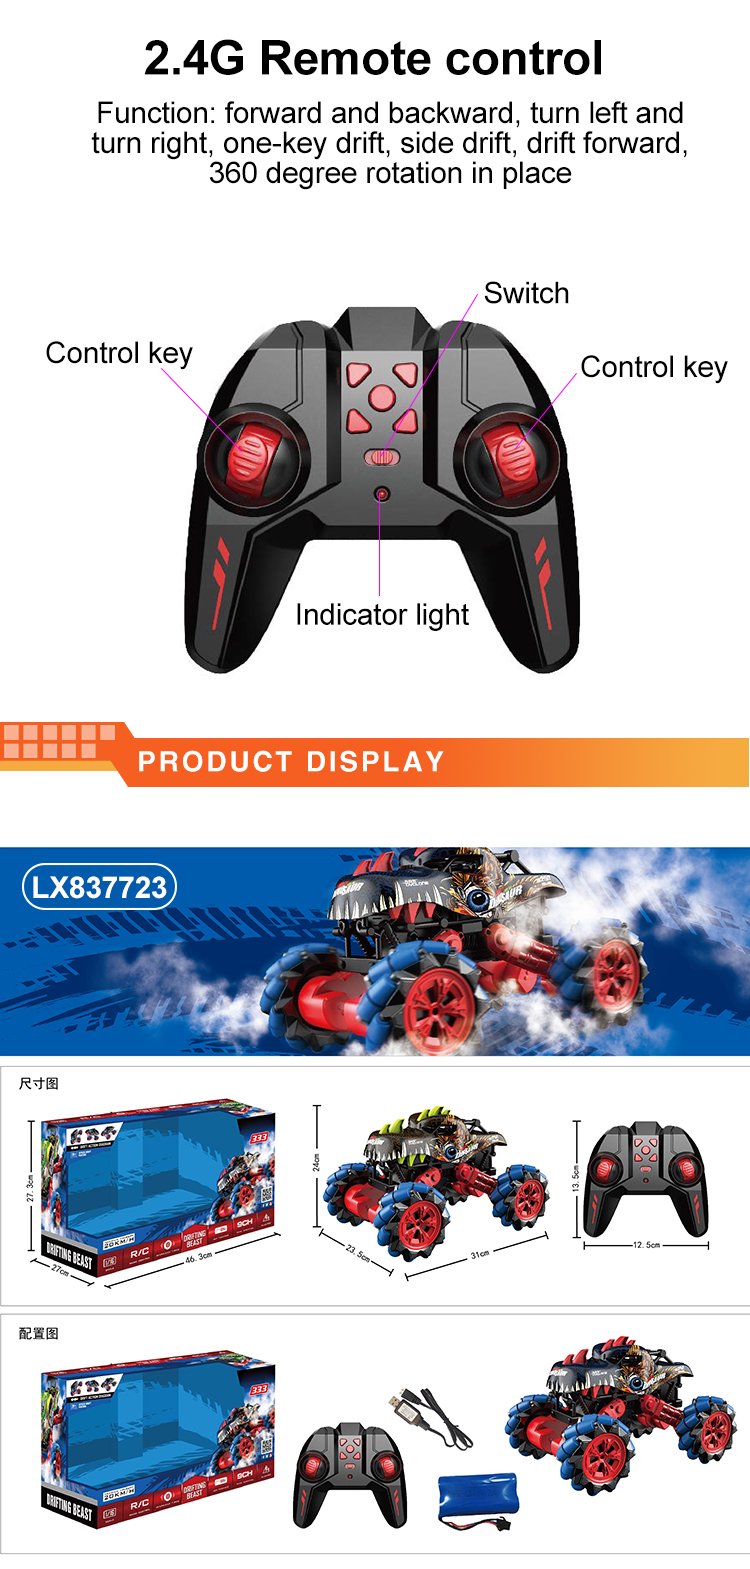 Toysmax professional remote control spider series for kids